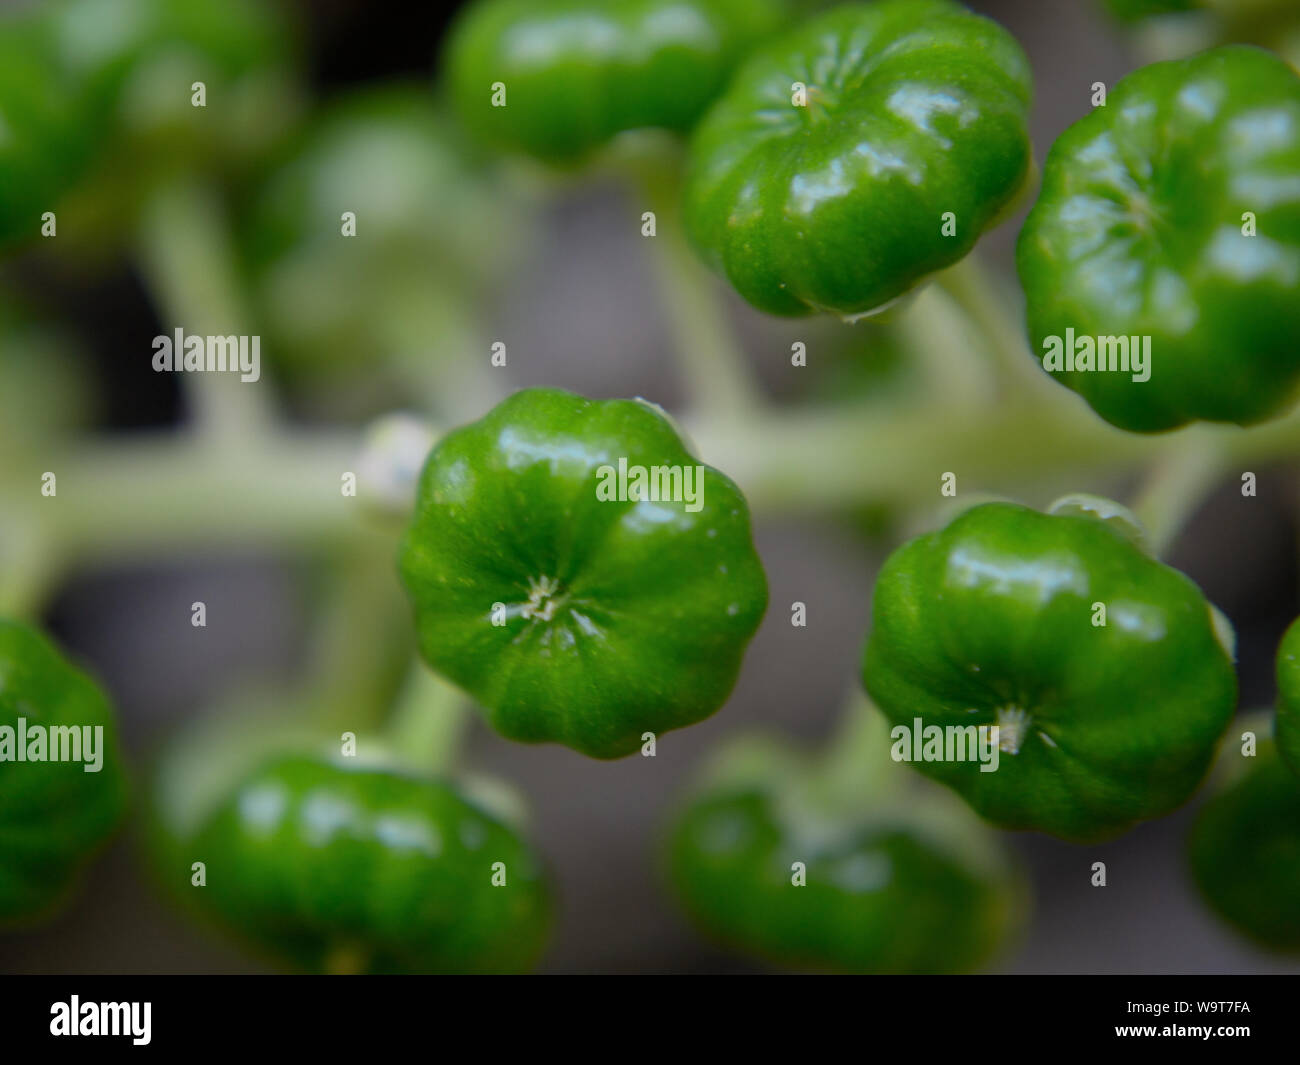 Close up of green pokeweed berries, Phytolacca decandra Stock Photo